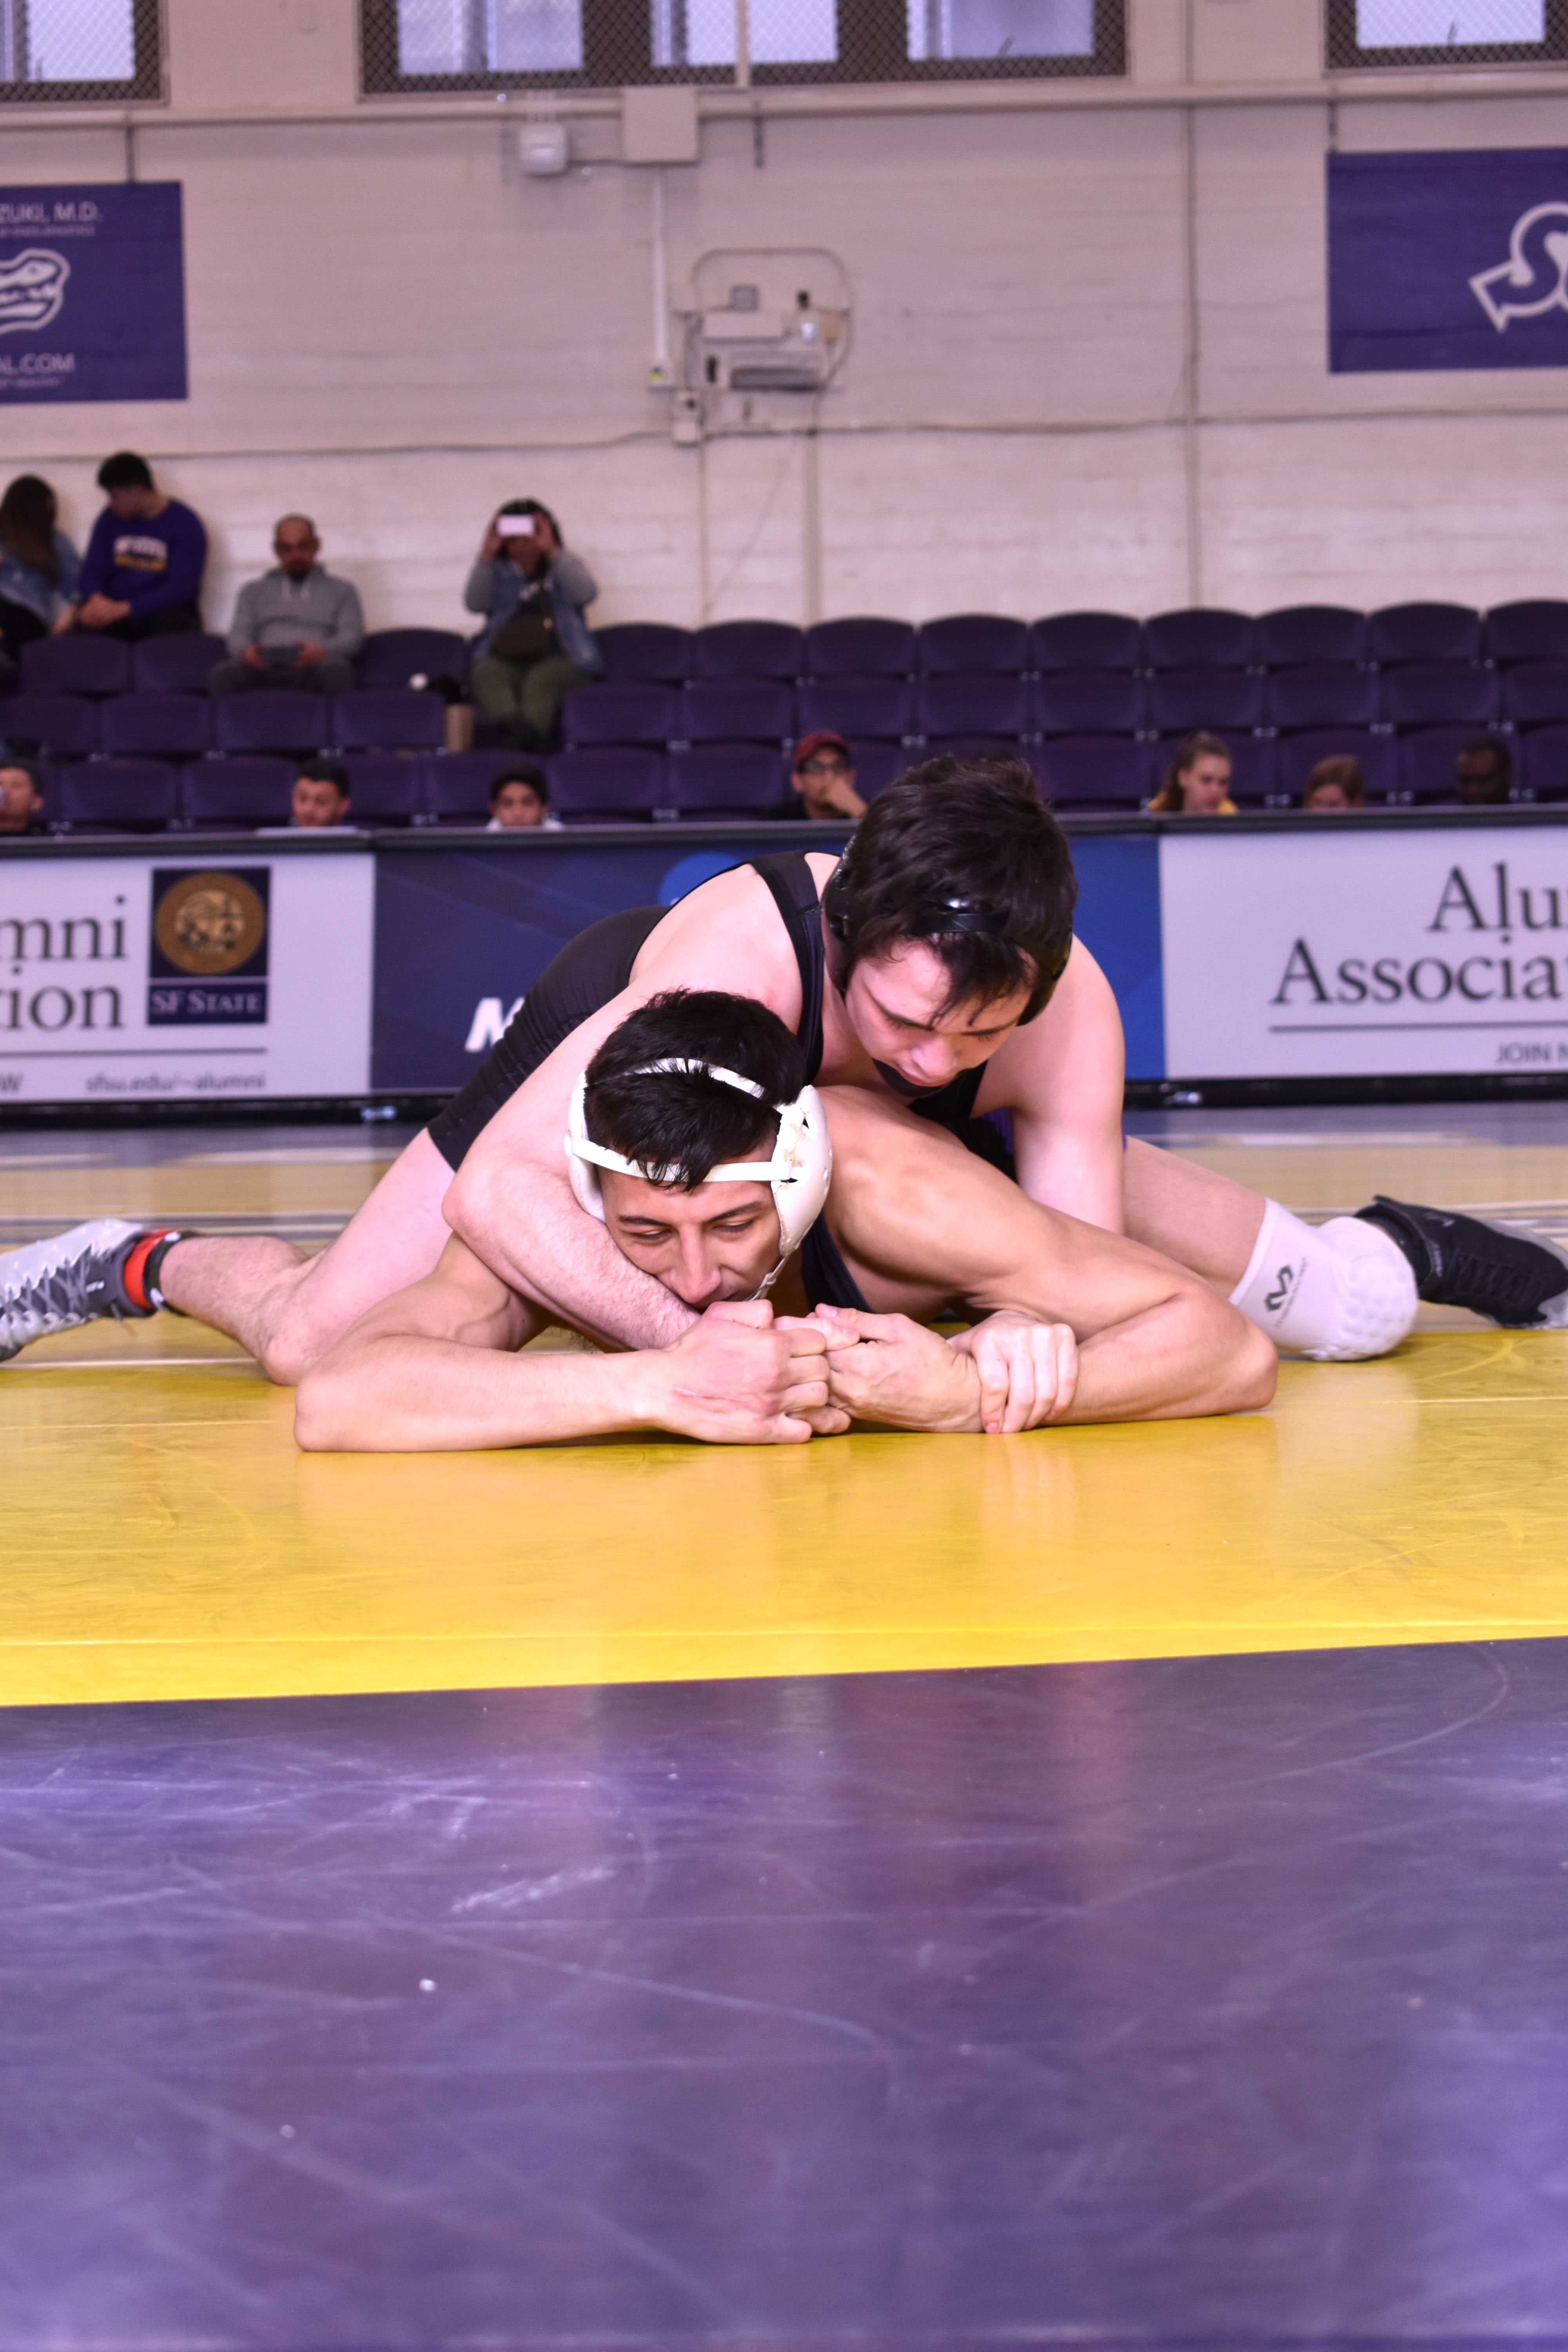 A player from the New Mexico Highlands wrestles with Isiah Alva in the Swamp at SF State in on Friday, Jan. 25.